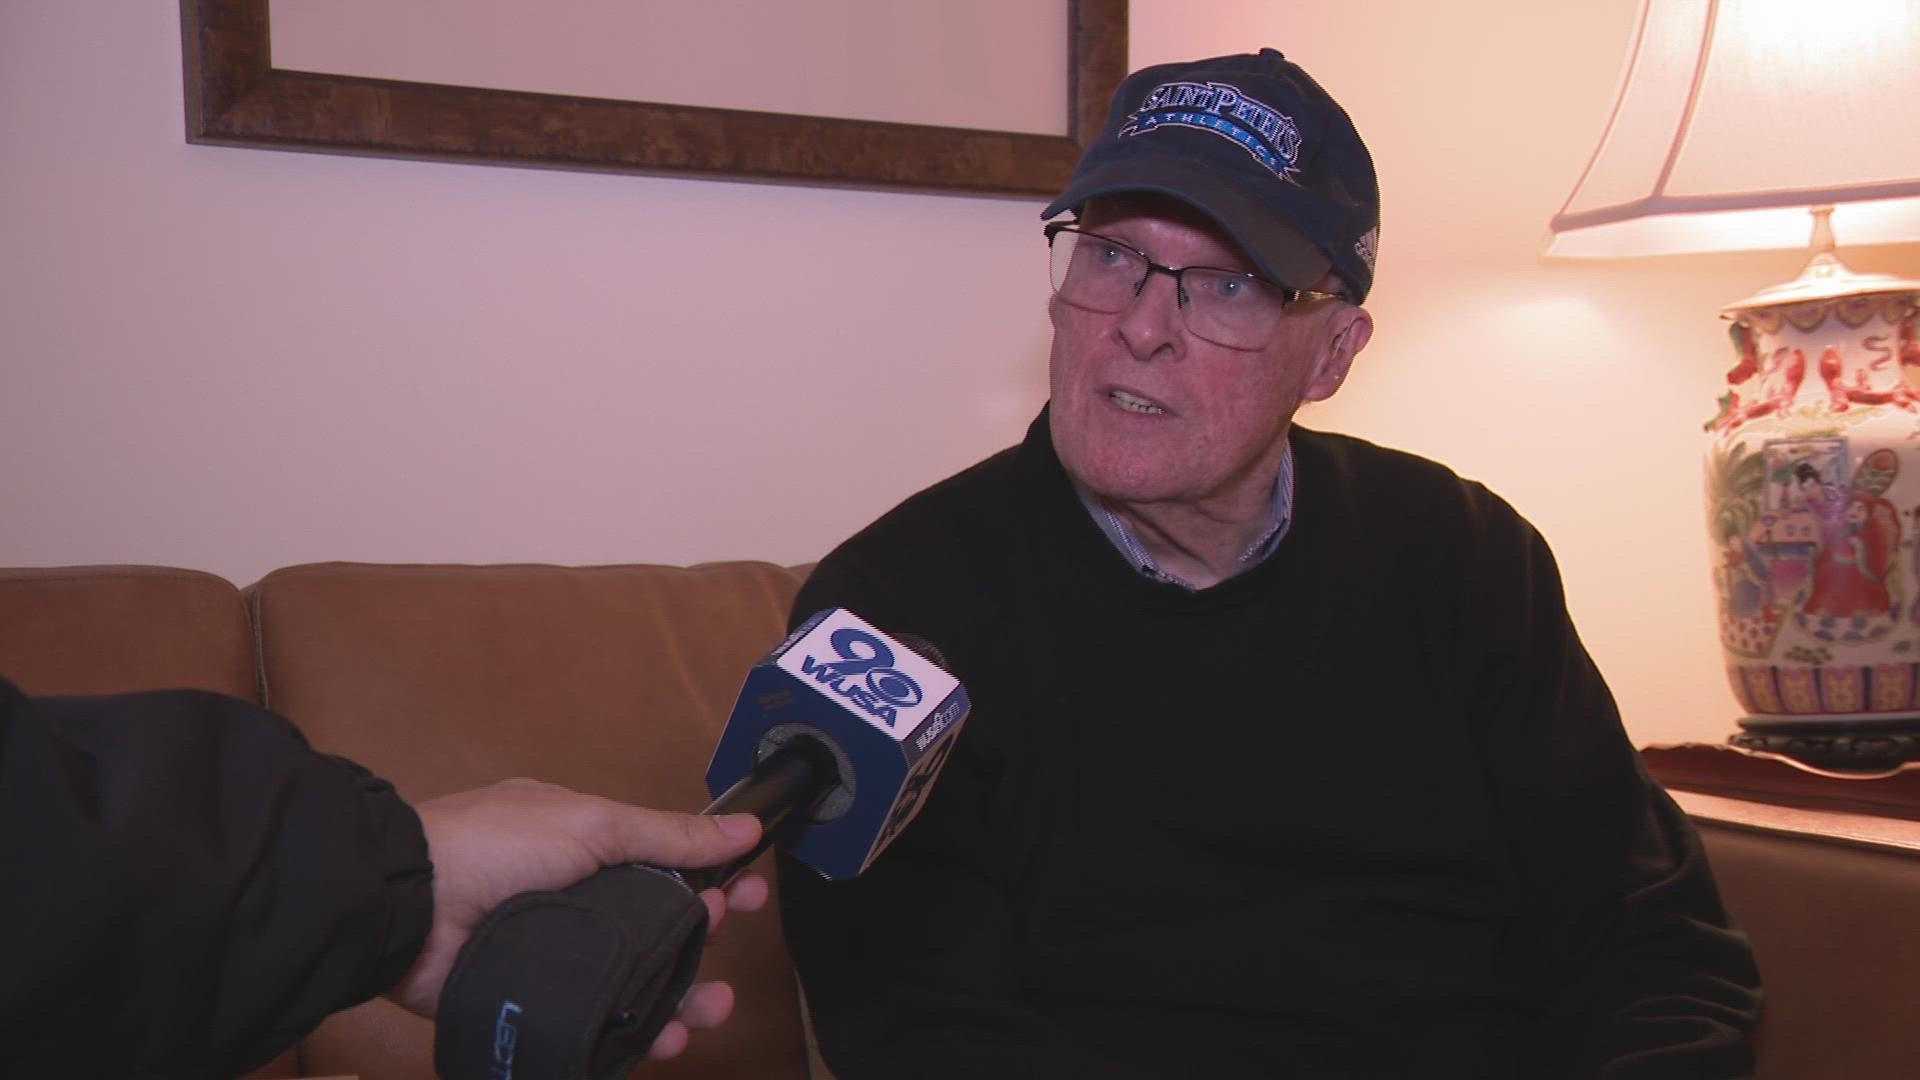 An Alexandria resident and the former captain of Saint Peter's 1960 team has a message for March Madness fans.